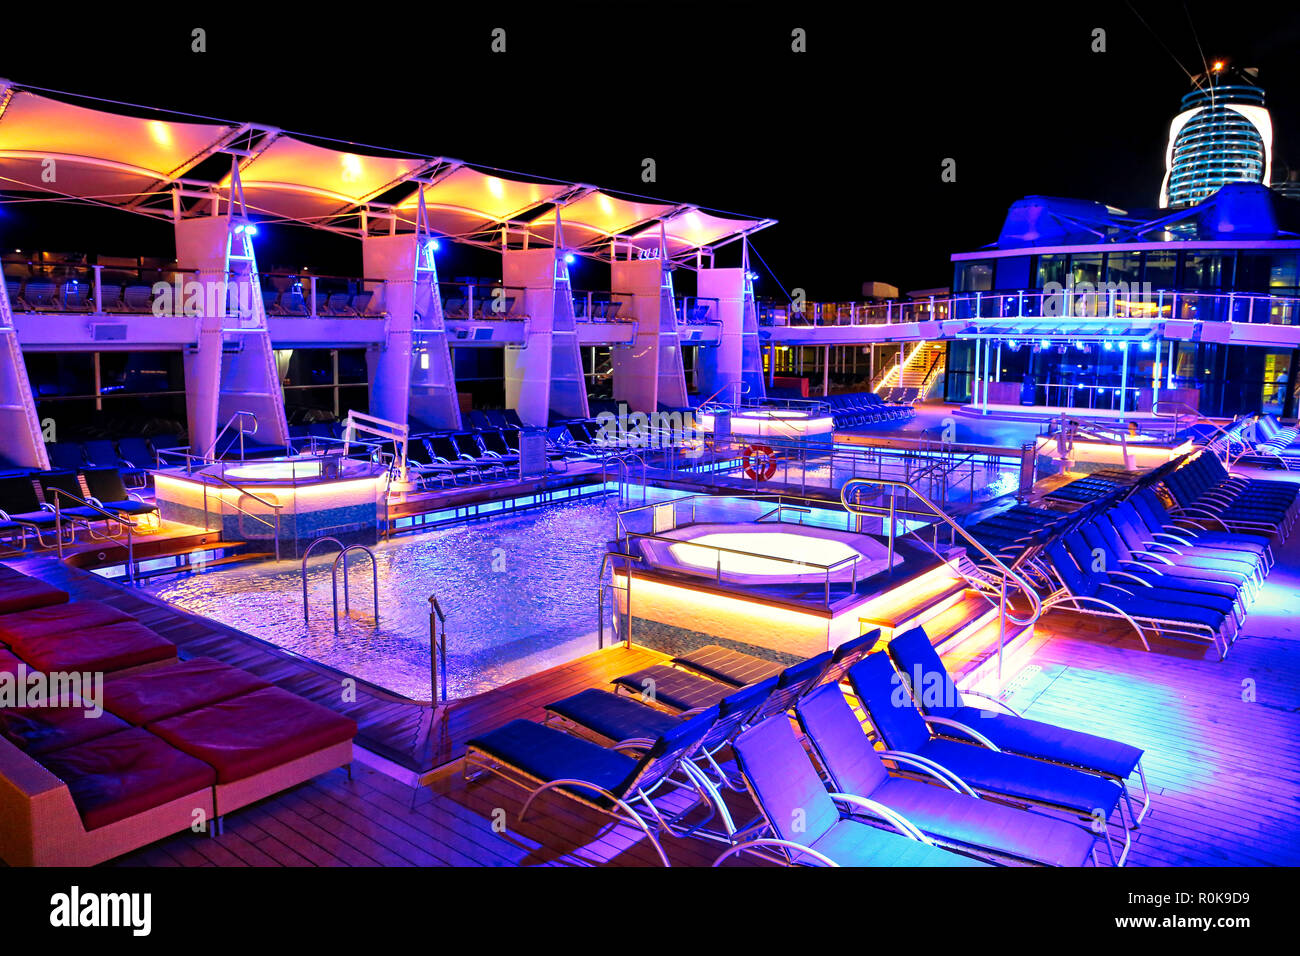 Nassau, Bahamas-2 October, 2017: Cruise ship swimming pool at night on the top deck with scenic views Stock Photo